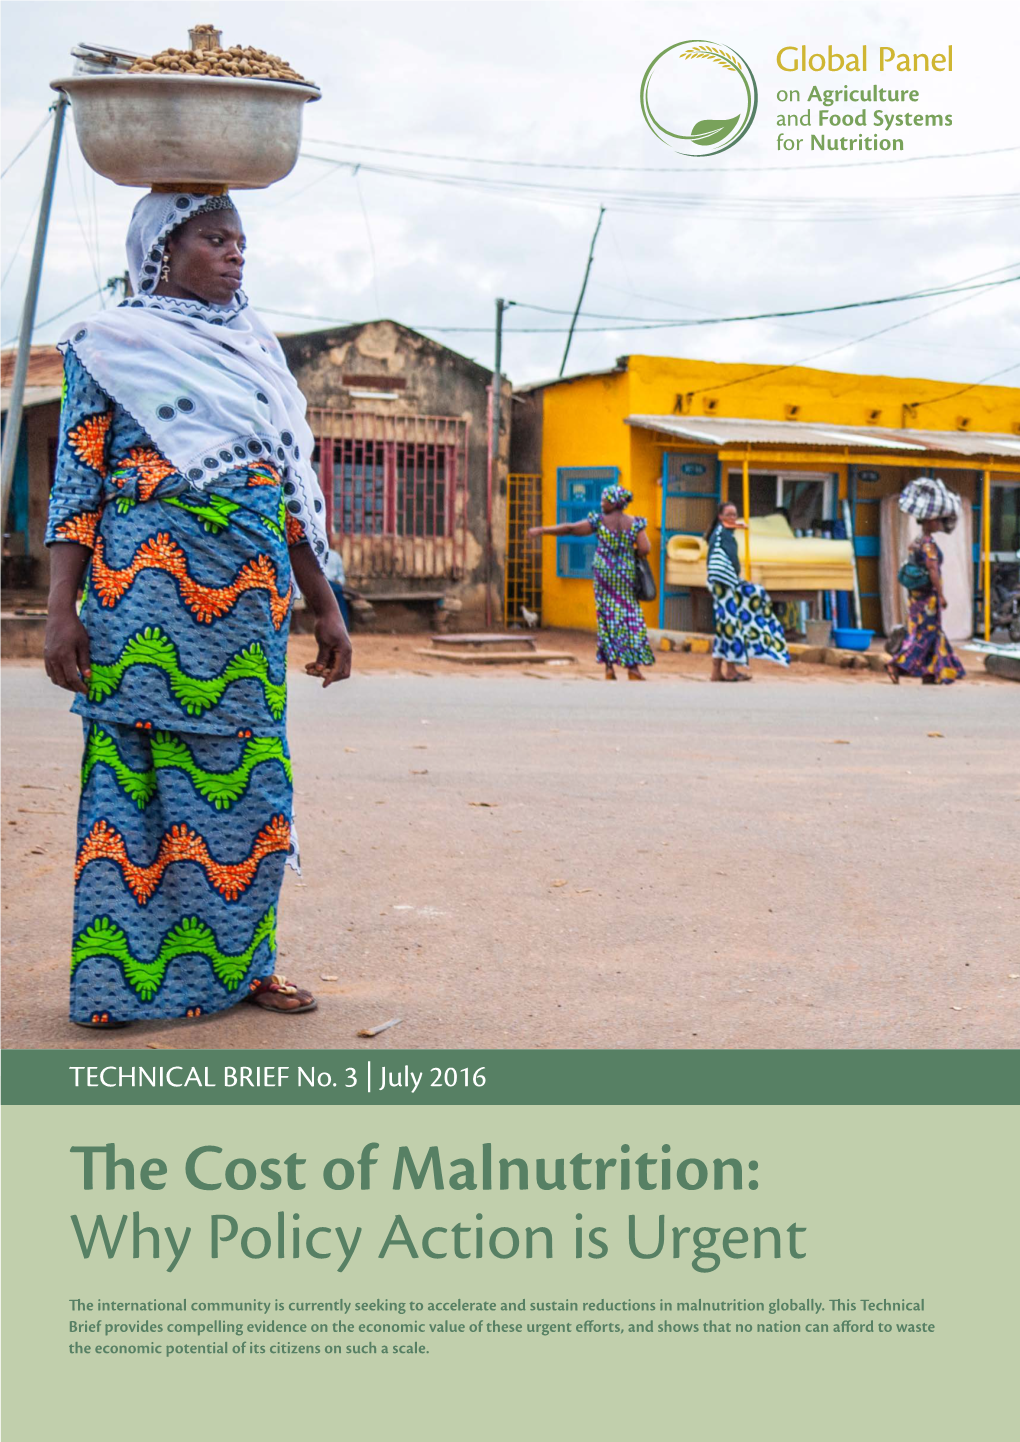 The Cost of Malnutrition: Why Policy Action Is Urgent